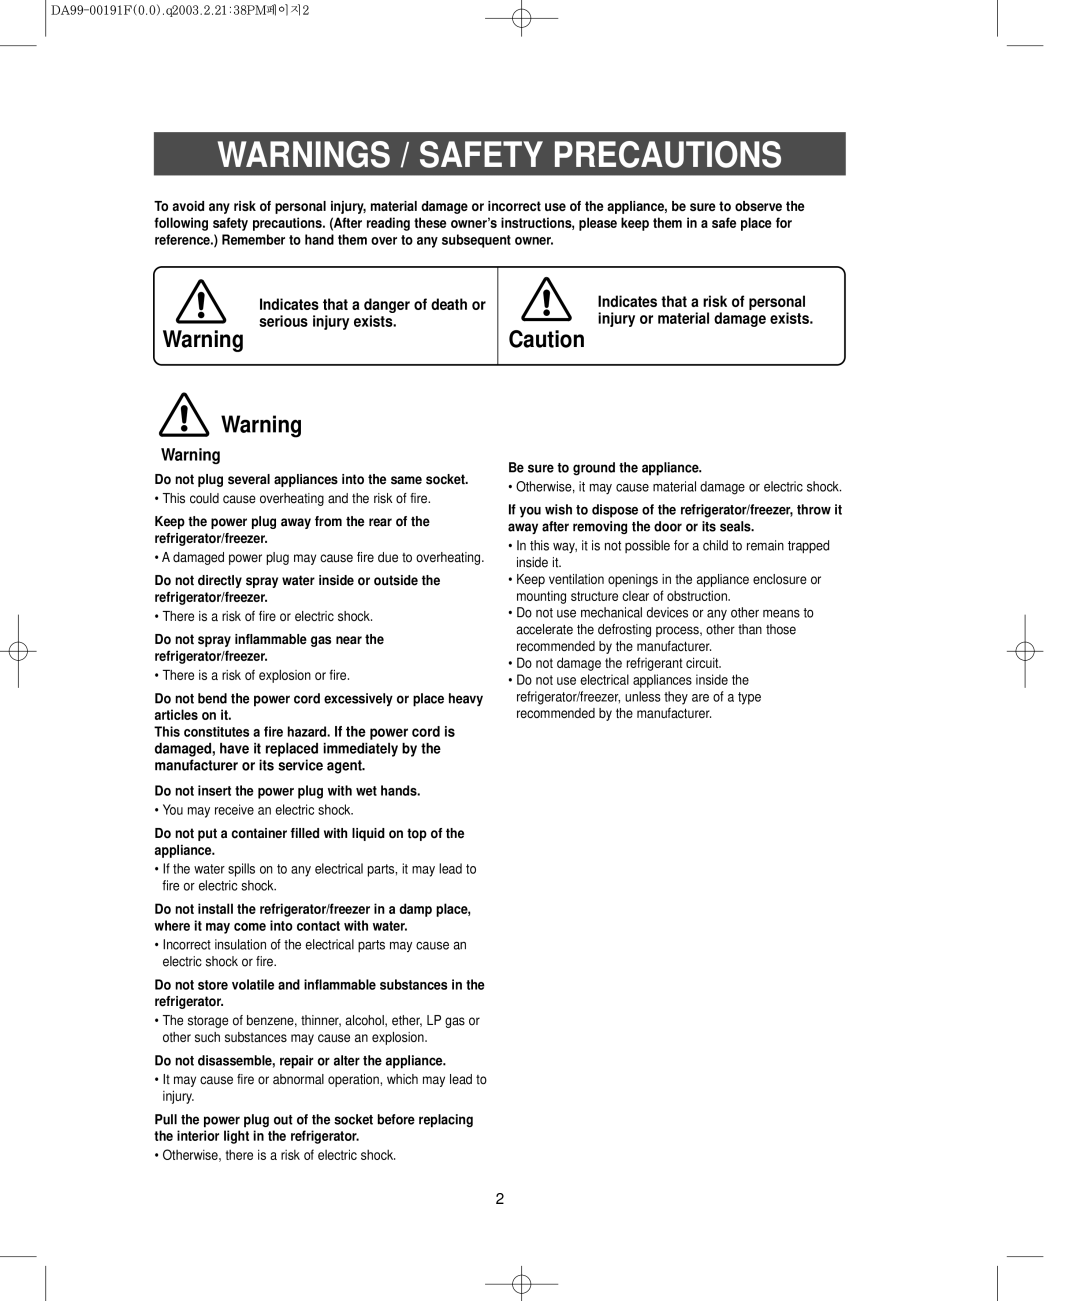 Samsung RB2044SL, RB1844SW, RB1844SL, RB2044SW owner manual Warnings / Safety Precautions, Be sure to ground the appliance 